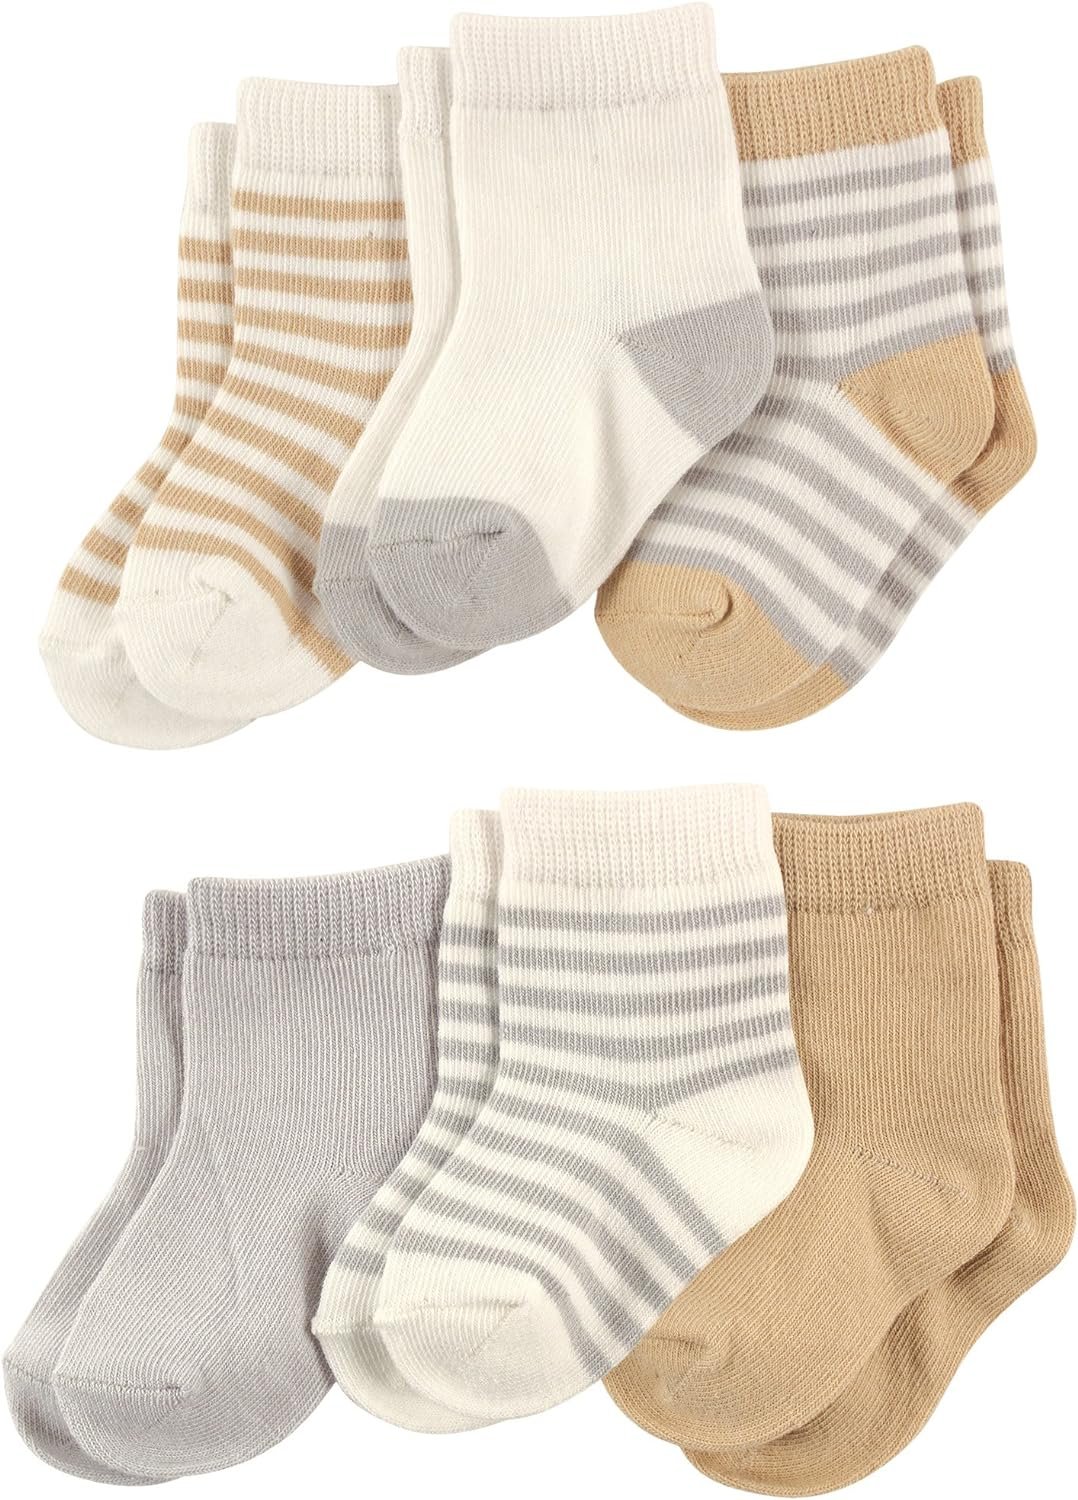 Touched by Nature Unisex Baby Organic Cotton Socks Review